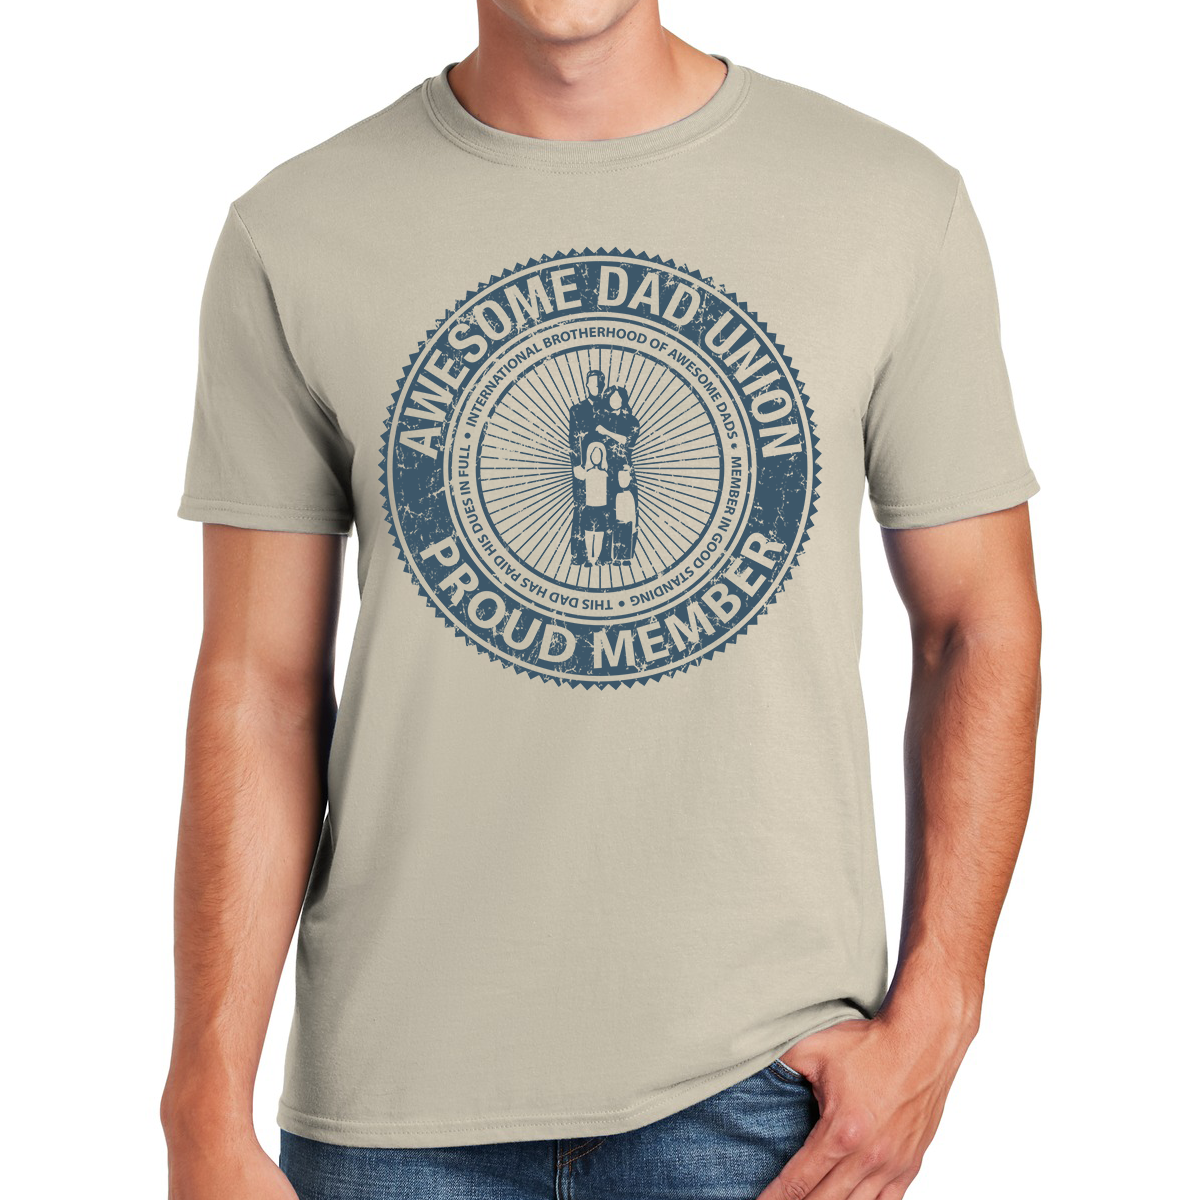 Awesome Dad Union Member In Good Standing Gift For Dads T-shirt